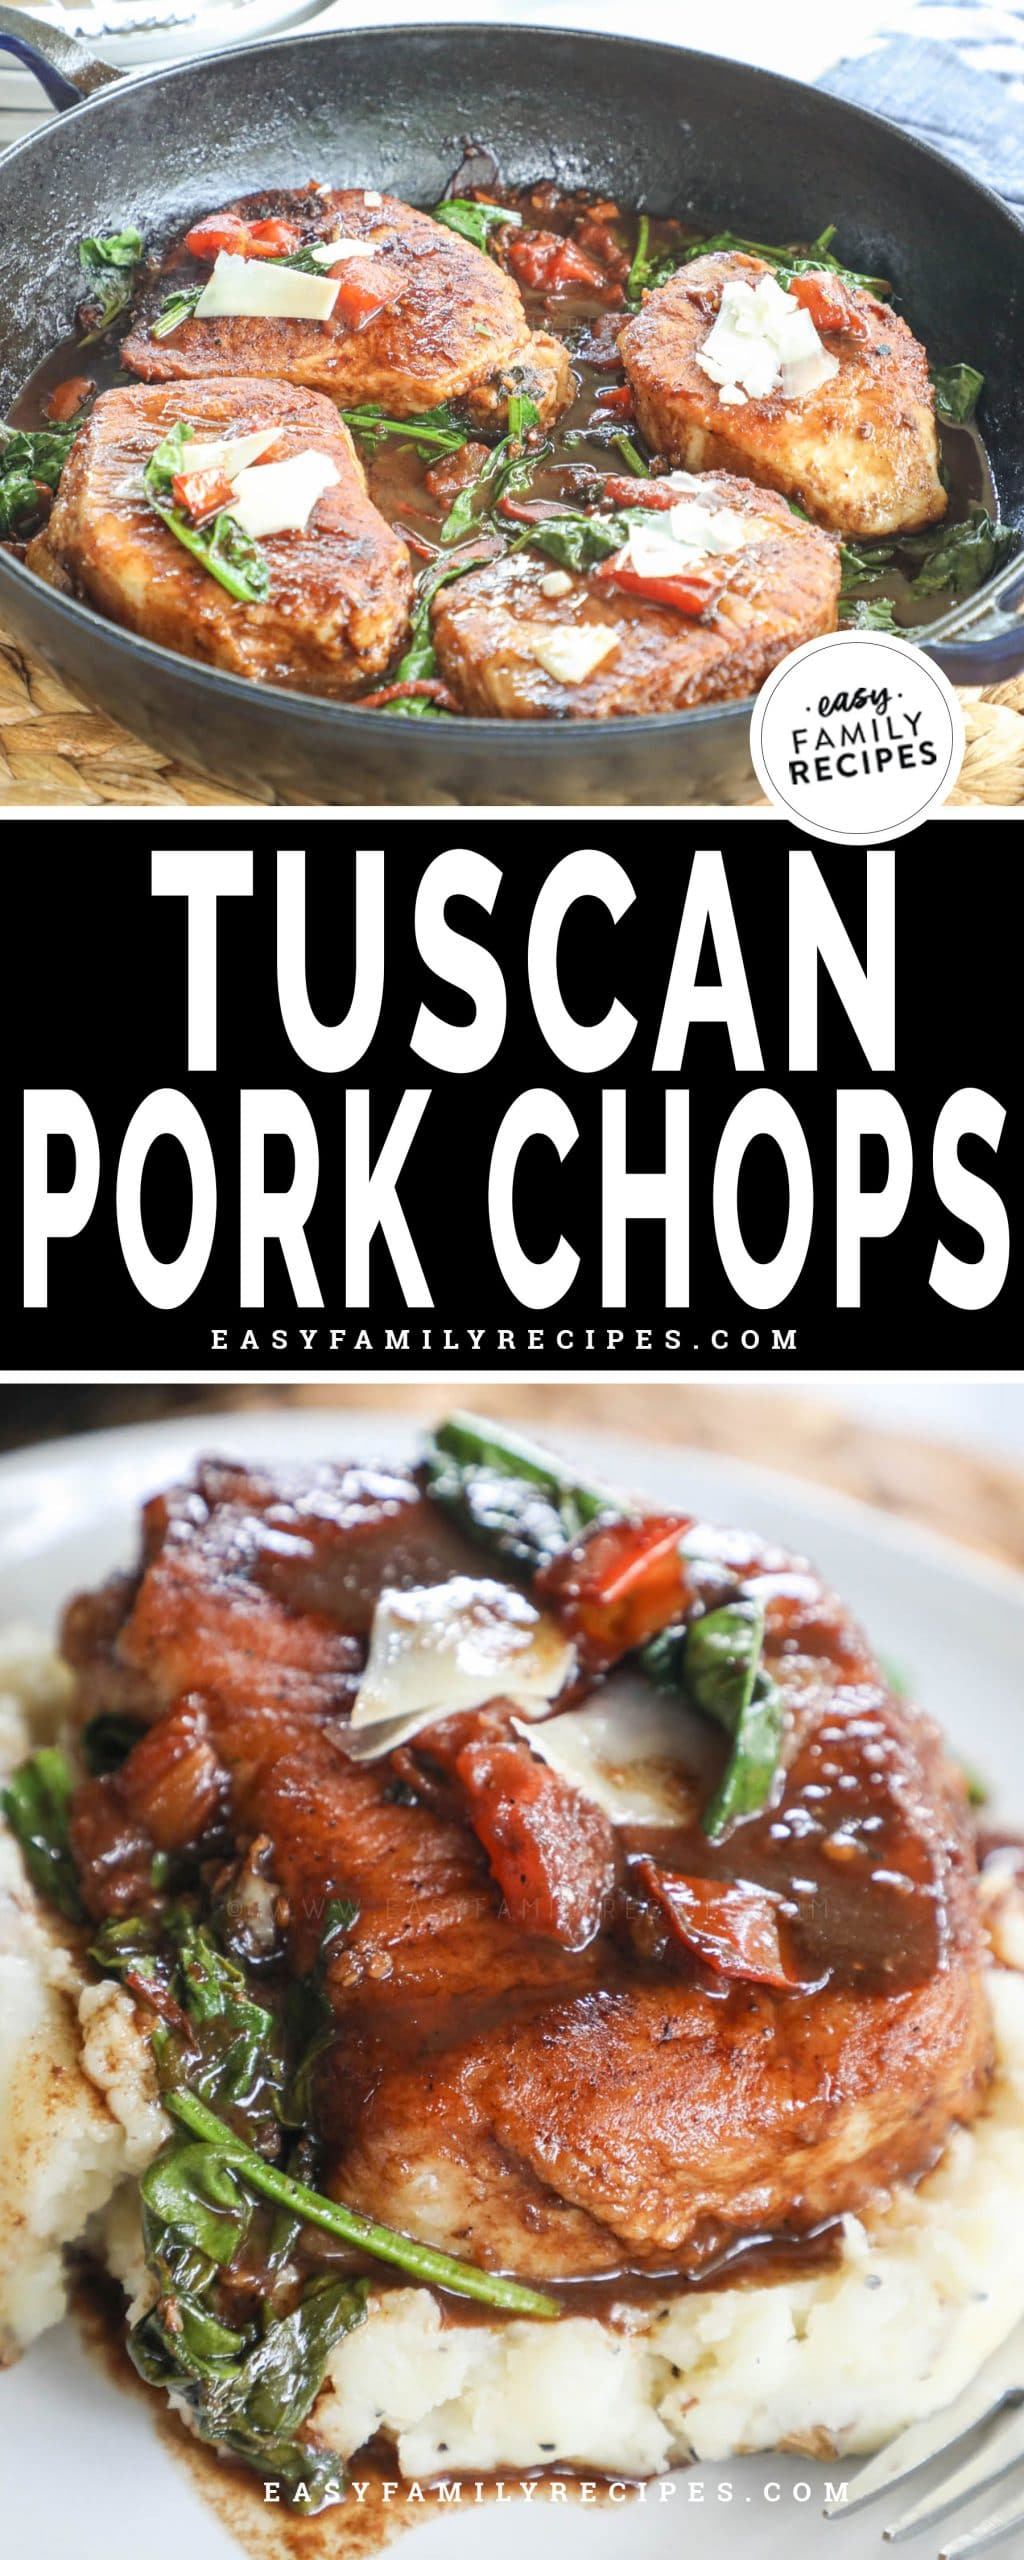 Tuscan Pork Chops cooked in a skillet with balsamic tomatoes and spinach